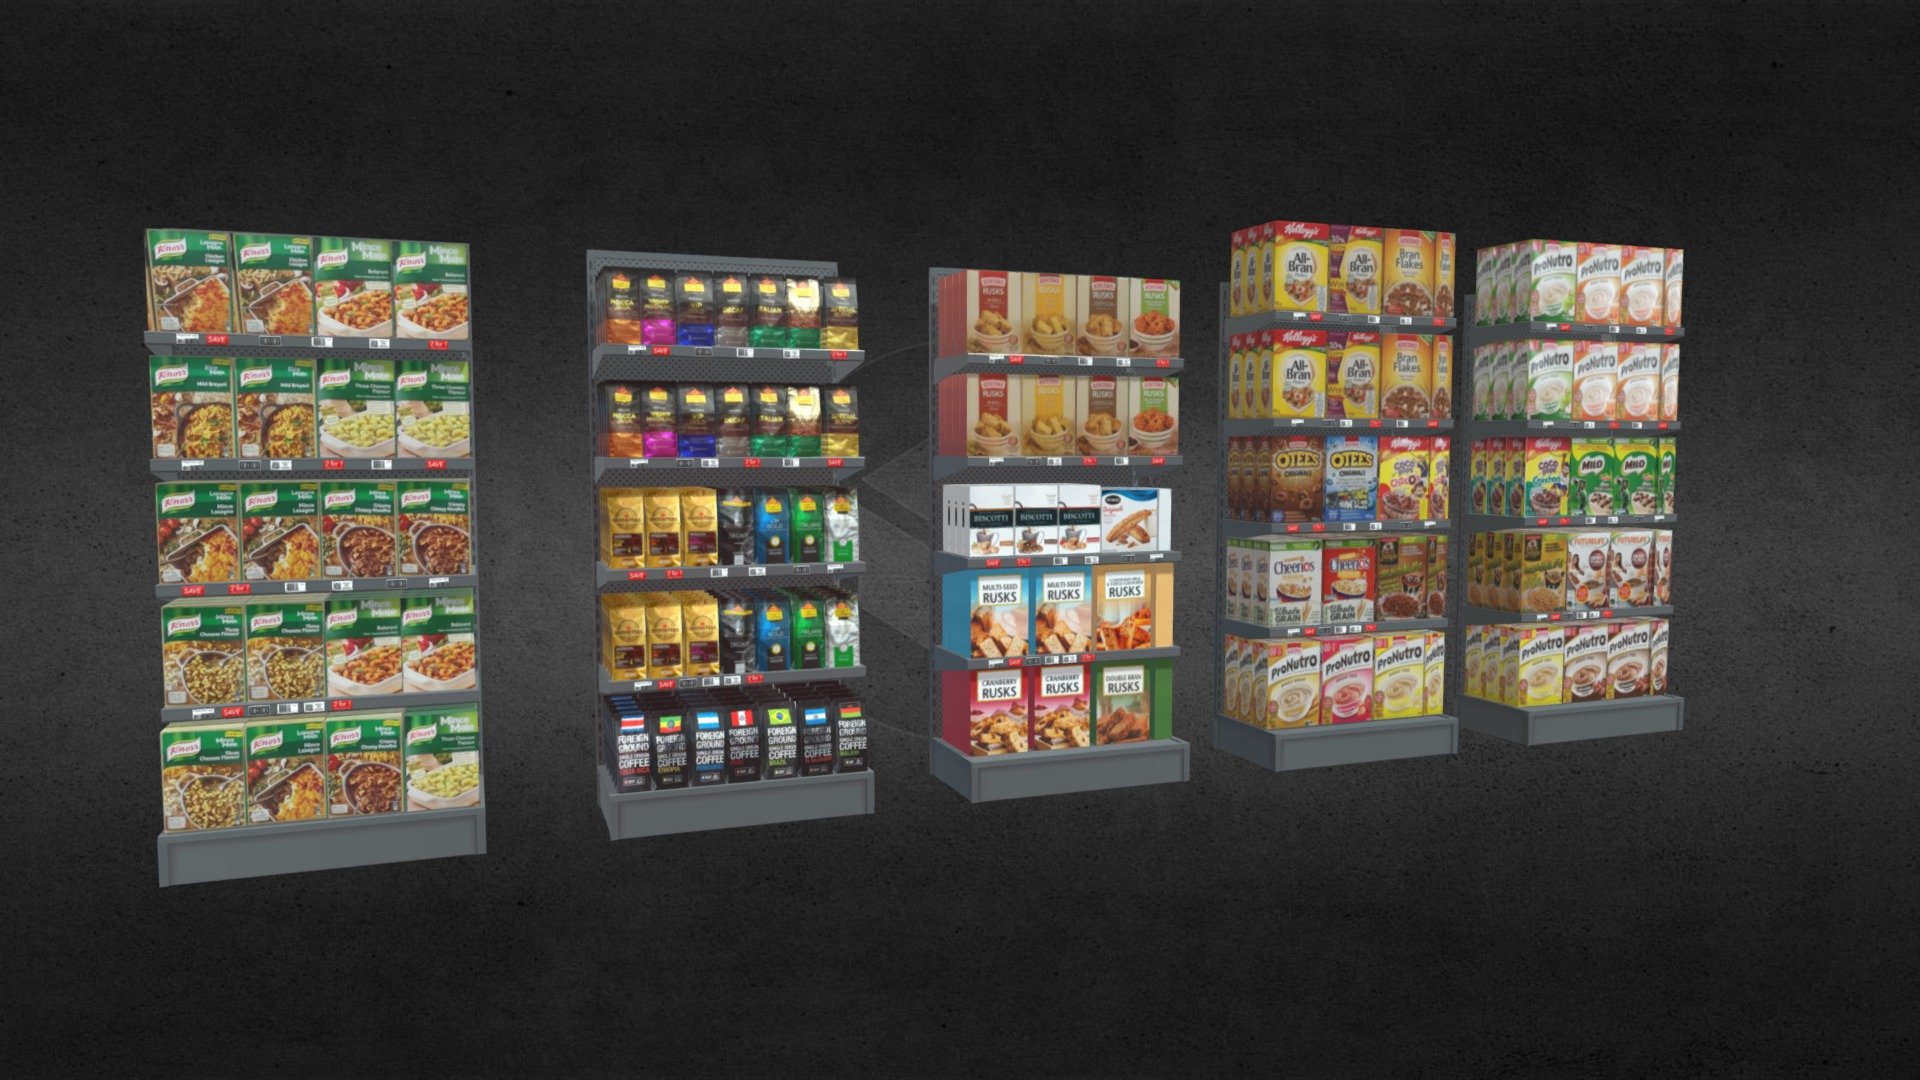 This 3D pack contains supermarket or superstore store interior shelf sections. Use it to assemble various shelving options in the retail environment. 

It includes the following components:

Shelf with coffee
Shelf with Cereal - 1
Shelf with Cereal - 2
Shelf with rusks / Biscotty
Shelf with boxed pasta and sauce / ready meal
Scale: Real world, Metric

File formats:

Blender 2.79 / Cycles - Native
FBX Export - From Max
3DS MAX Autodesk - Scanline V-ray
UVW Texture coordinates: UVW Unwrapped, Mixed - Store Environment Shop Shelves With Stock - Buy Royalty Free 3D model by 3D Content Online (@hknoblauch) 3d model